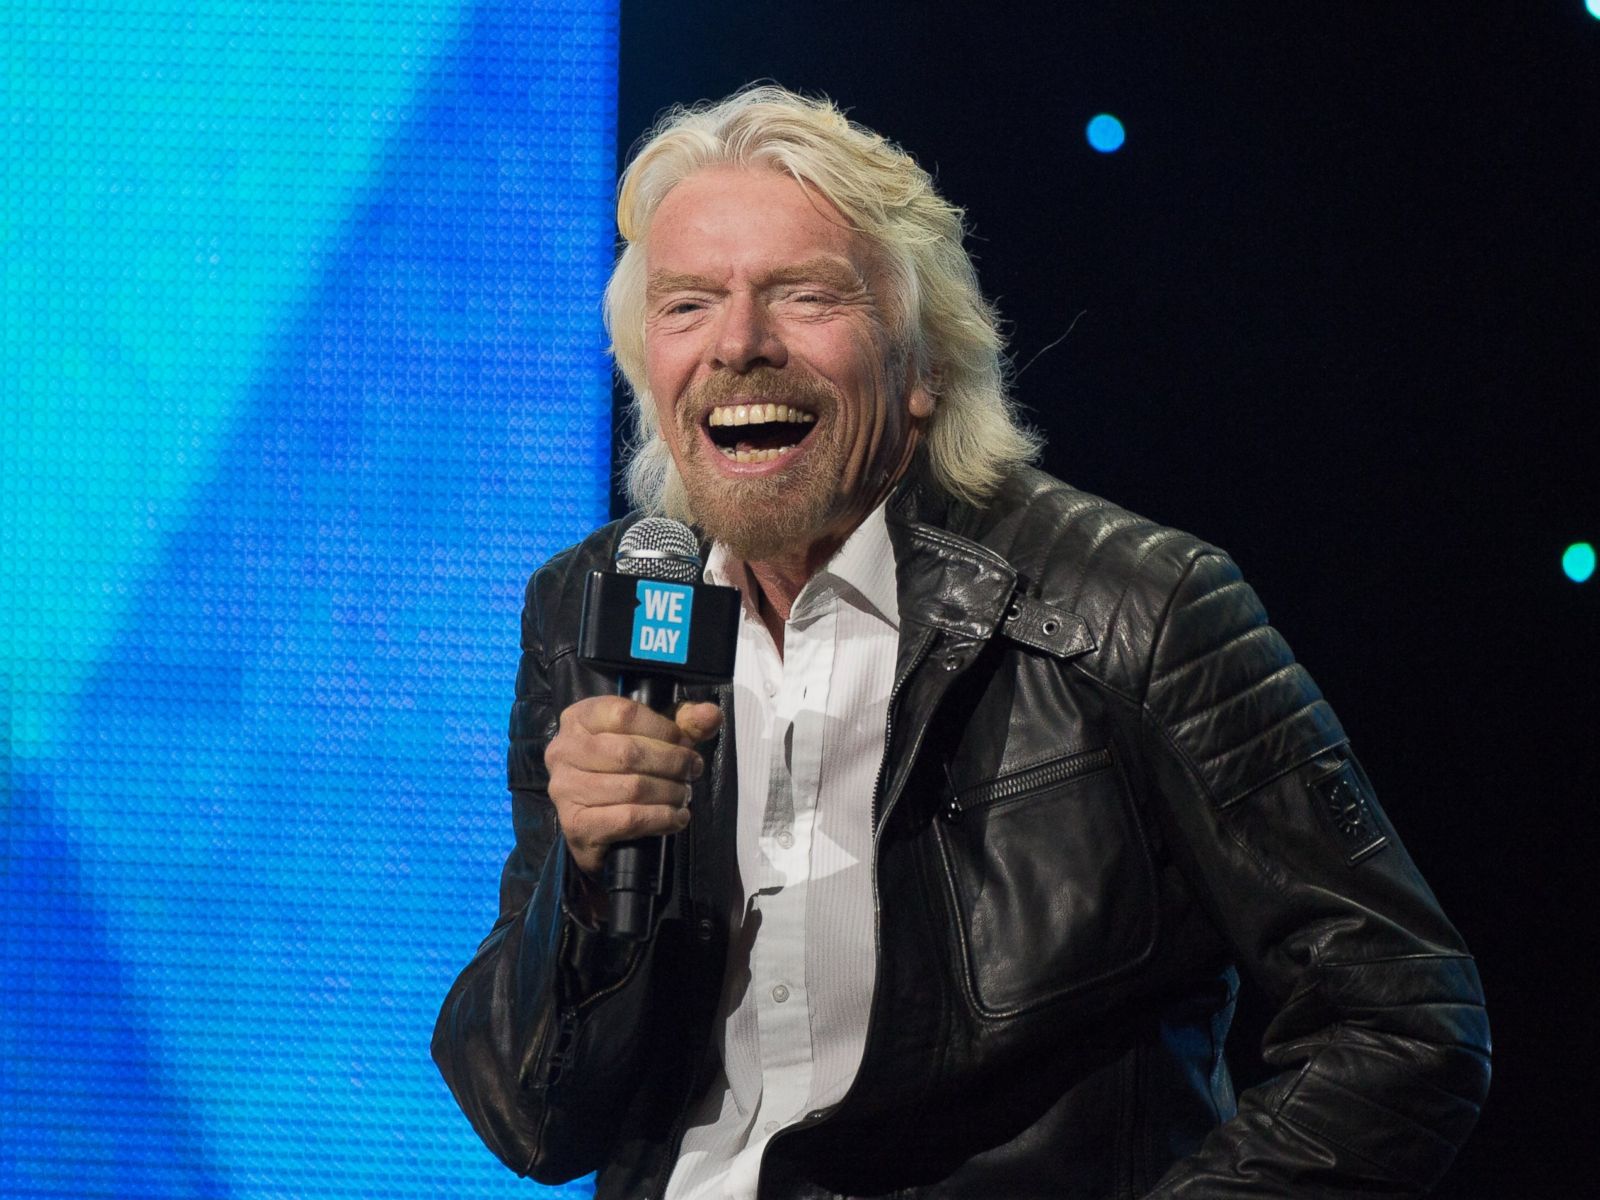 Richard Branson: How to Get Your Own Island